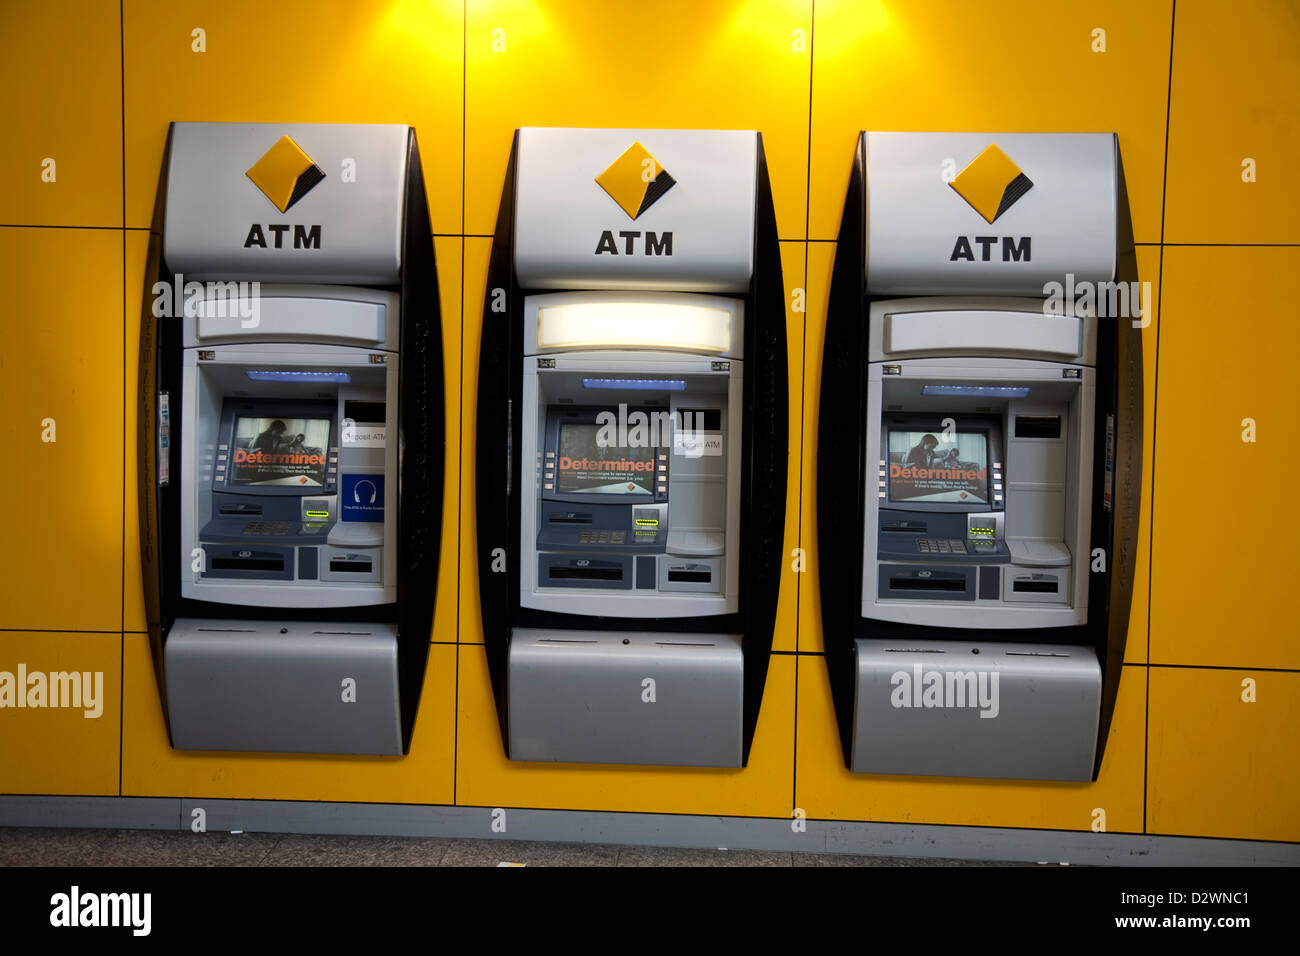 ATM unattended machine that dispenses money when a personCommonwealth Bank Auto tellers Sydney Australia Stock Photo